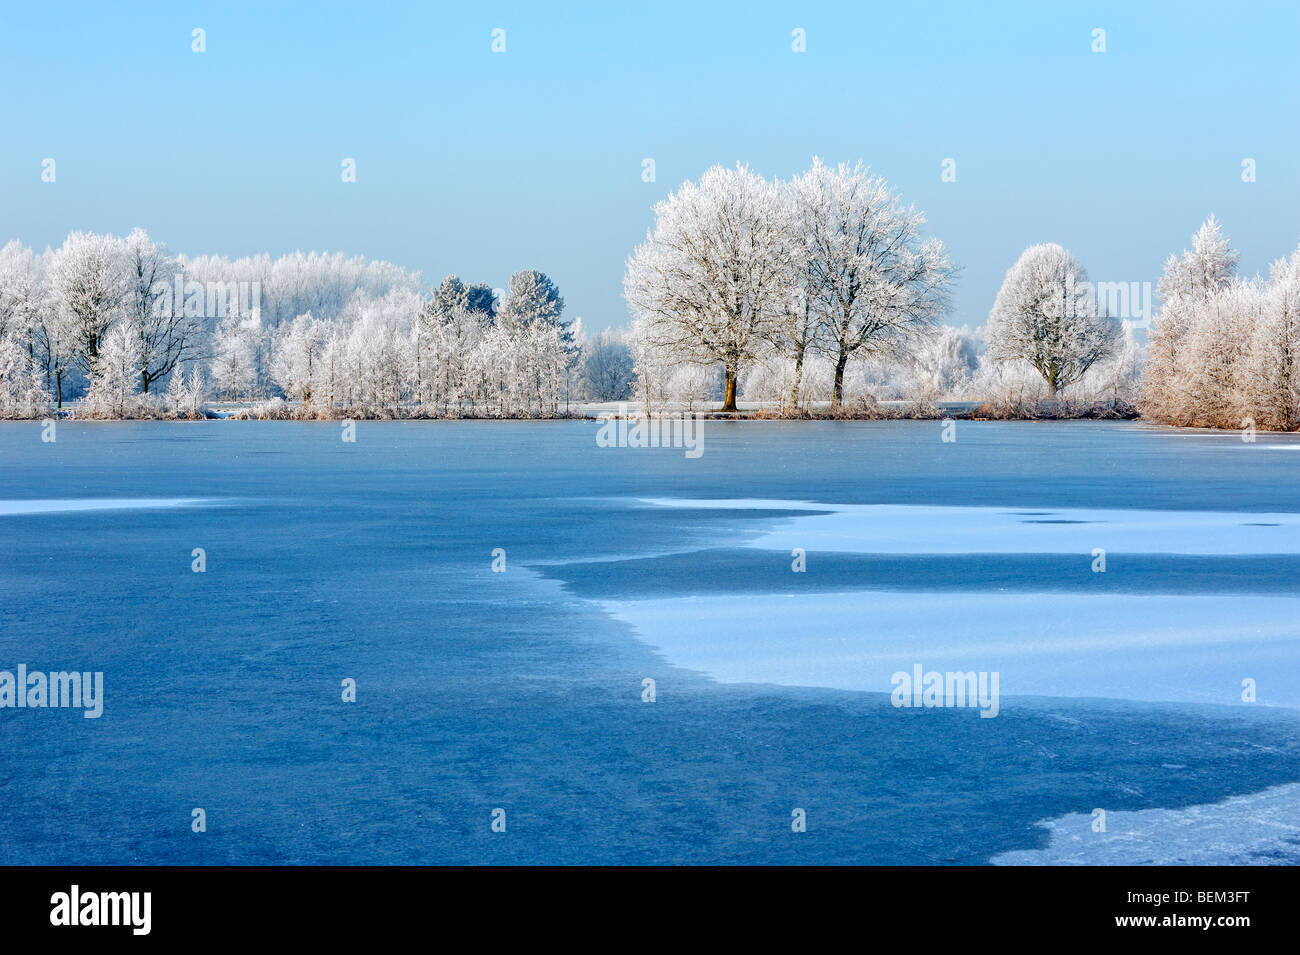 Frozen pond with ice in park landscape with trees covered in white frost / hoarfrost, Provincial Domain Wachtebeke, Belgium Stock Photo